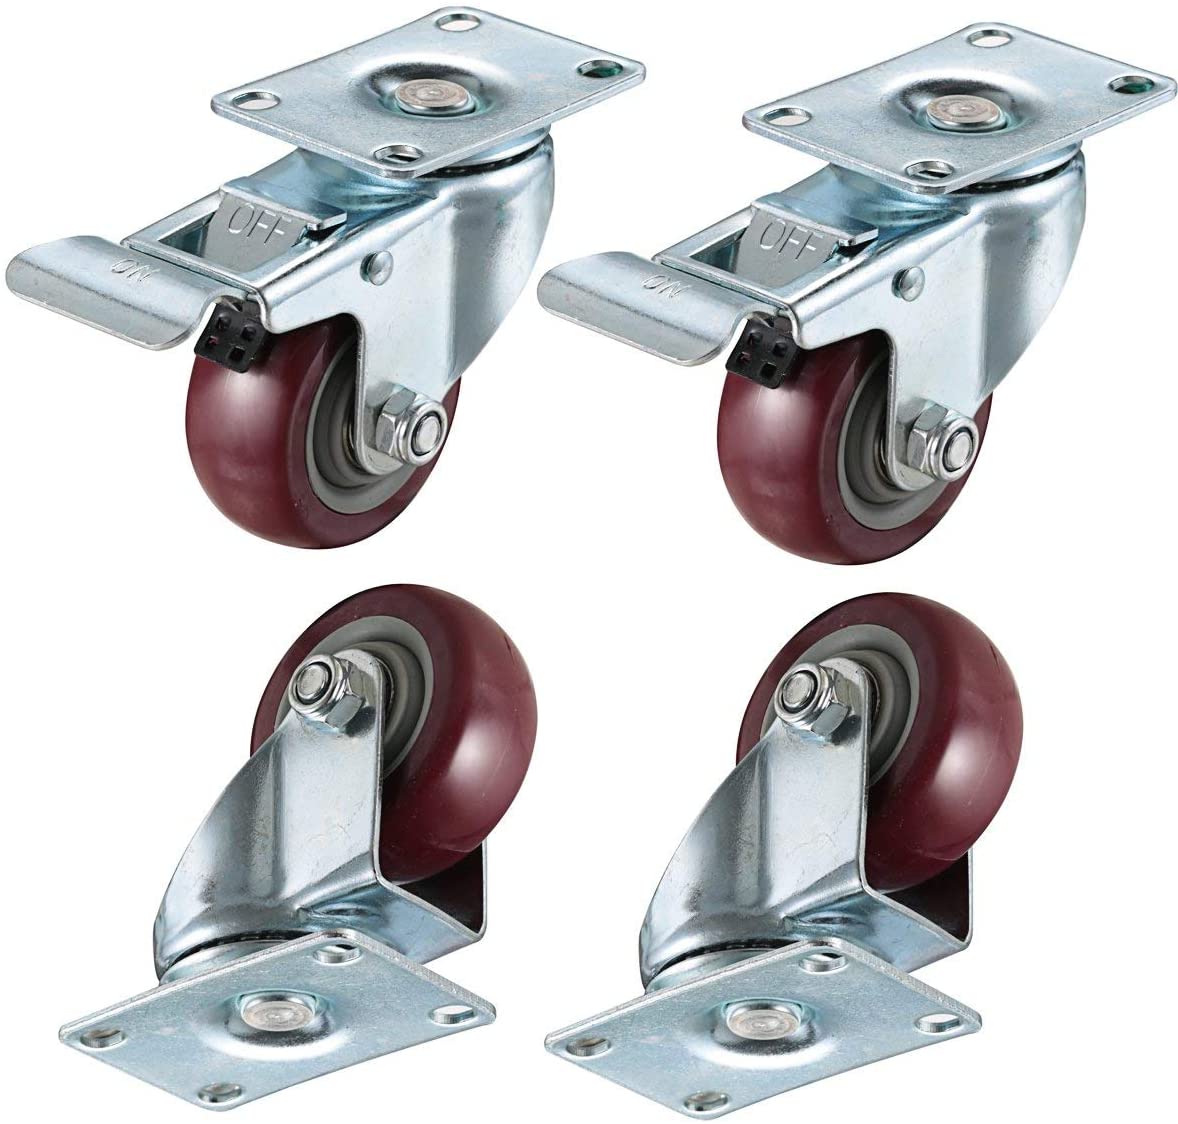 online sales bayite 4 Pack 3 Heavy Duty Caster Wheels Polyurethane PU  Swivel Casters with 360 Degree Top Plate 500lb Total Capacity for Set of 4  (2 with Brakes& 2 without) Red new listing -cengizakturk.com